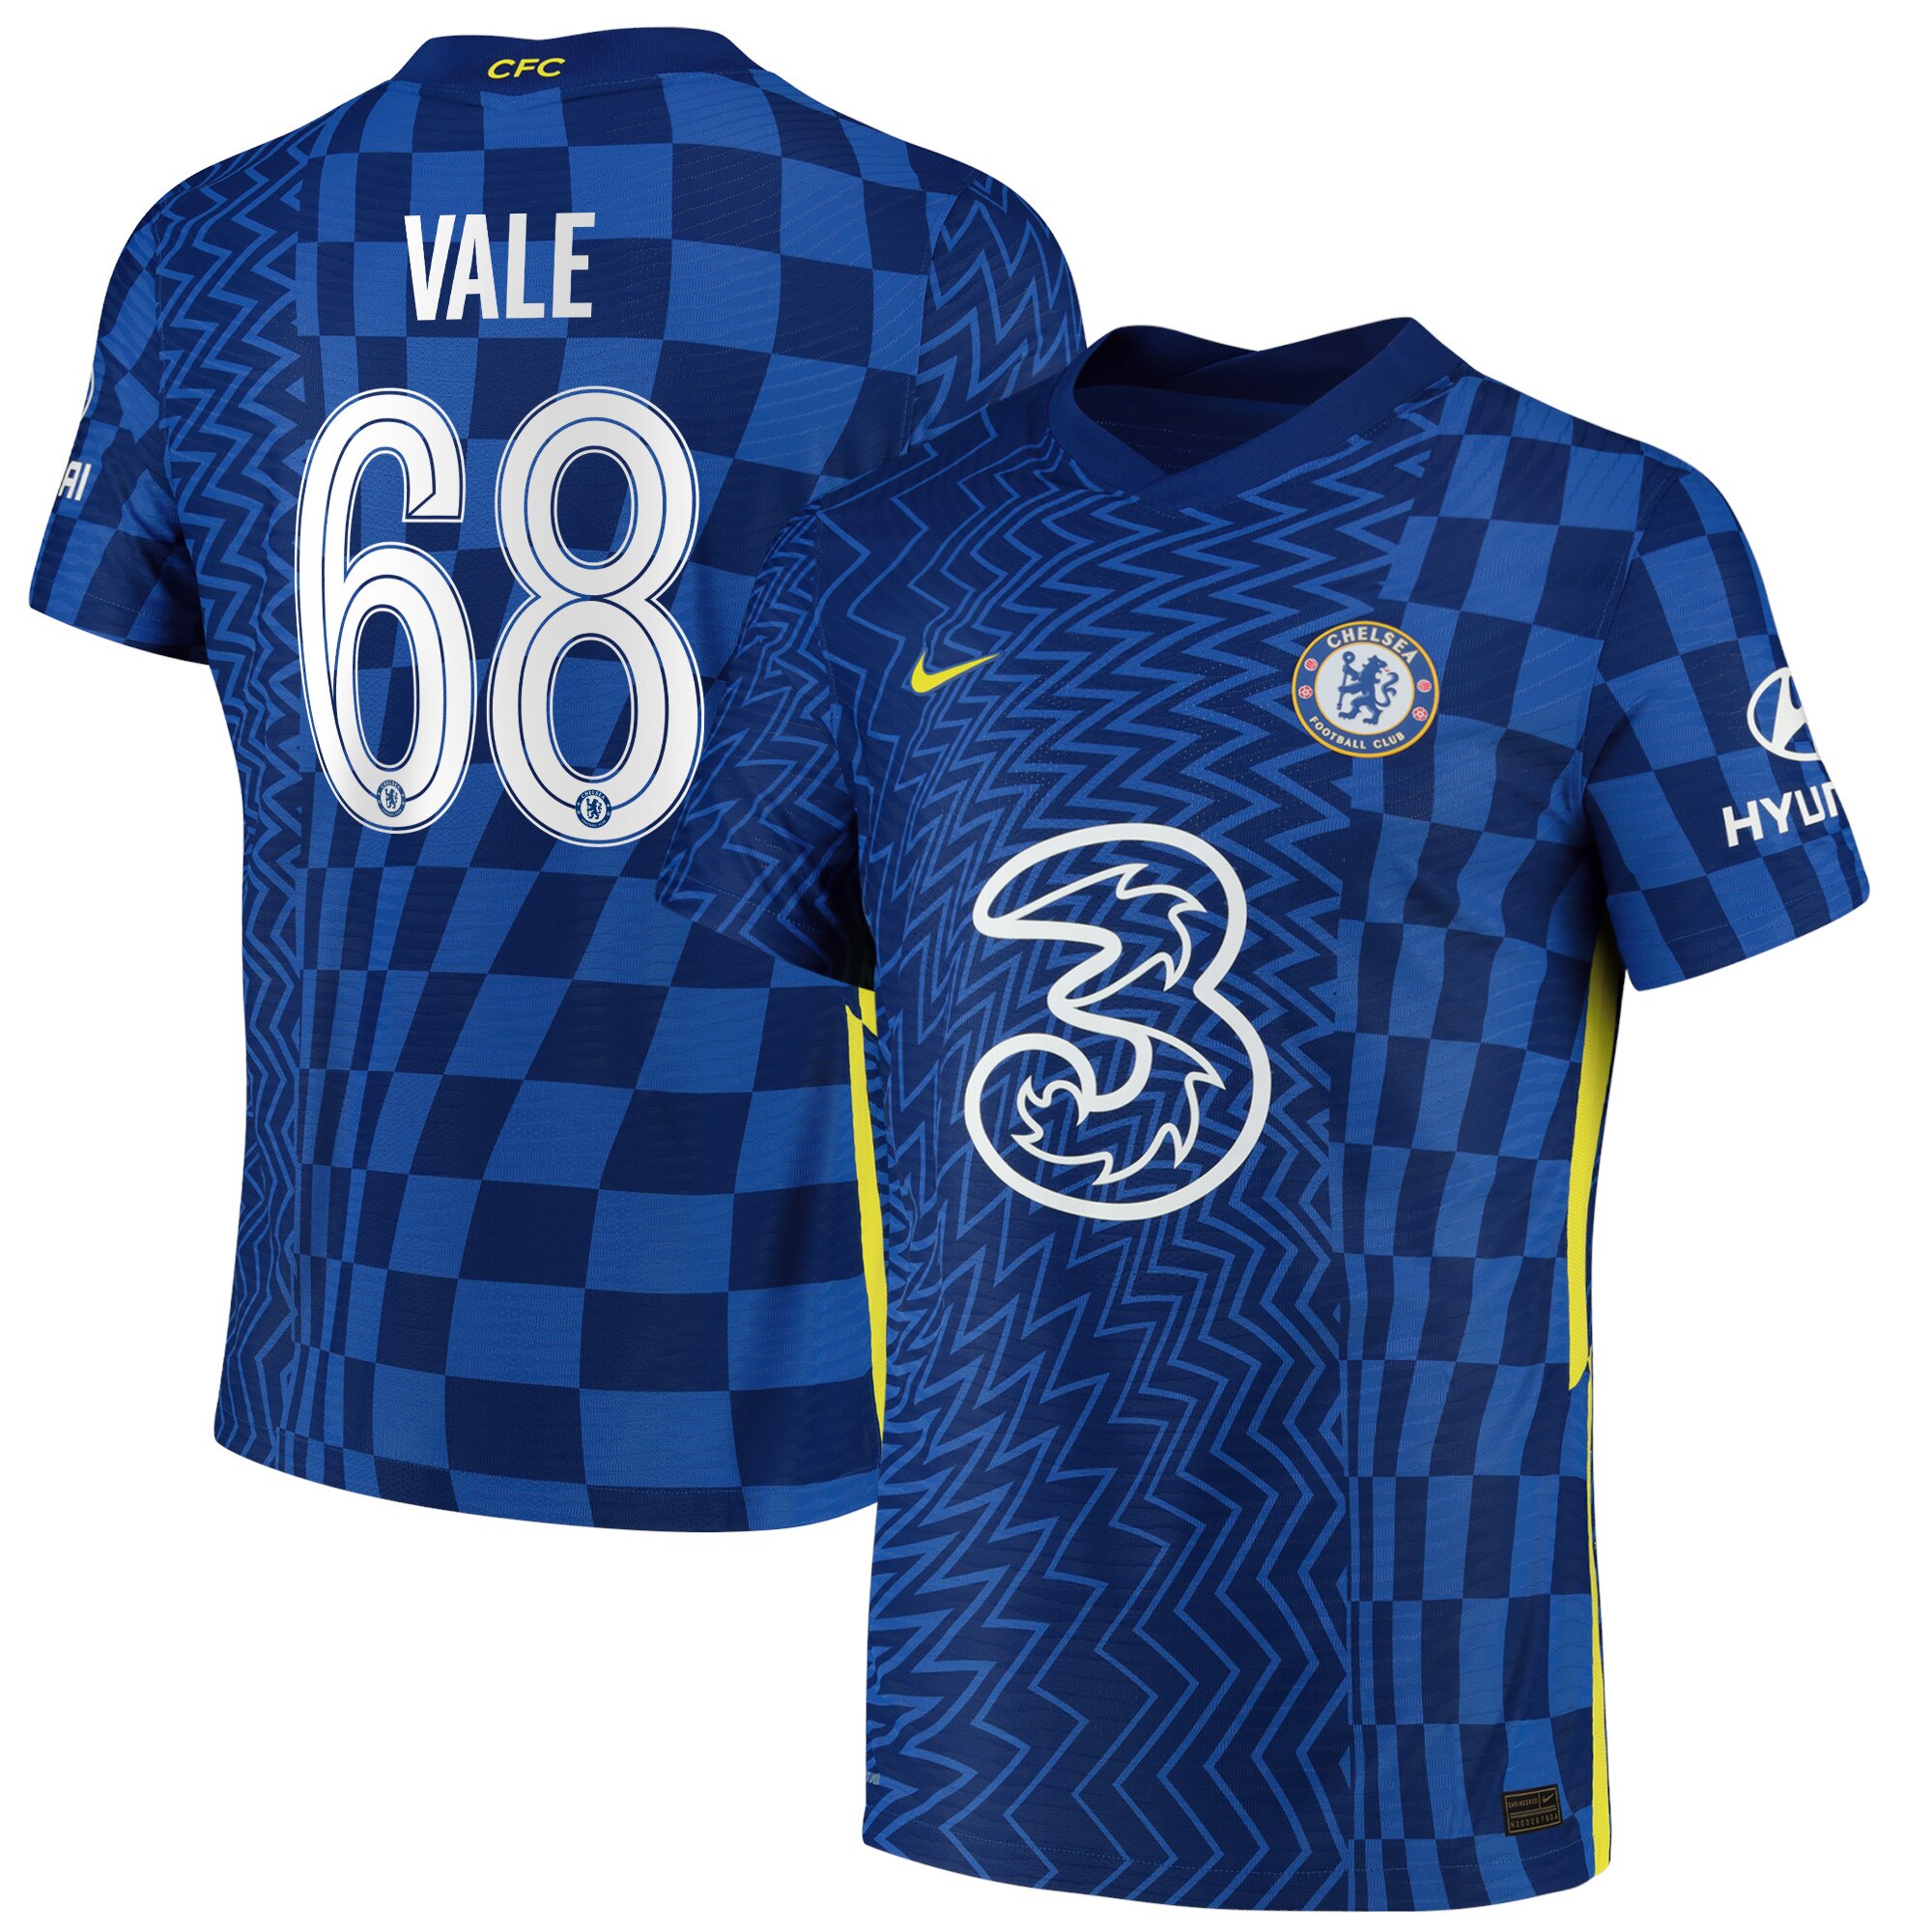 Chelsea Cup Home Vapor Match Shirt 2021-22 with Vale 68 printing